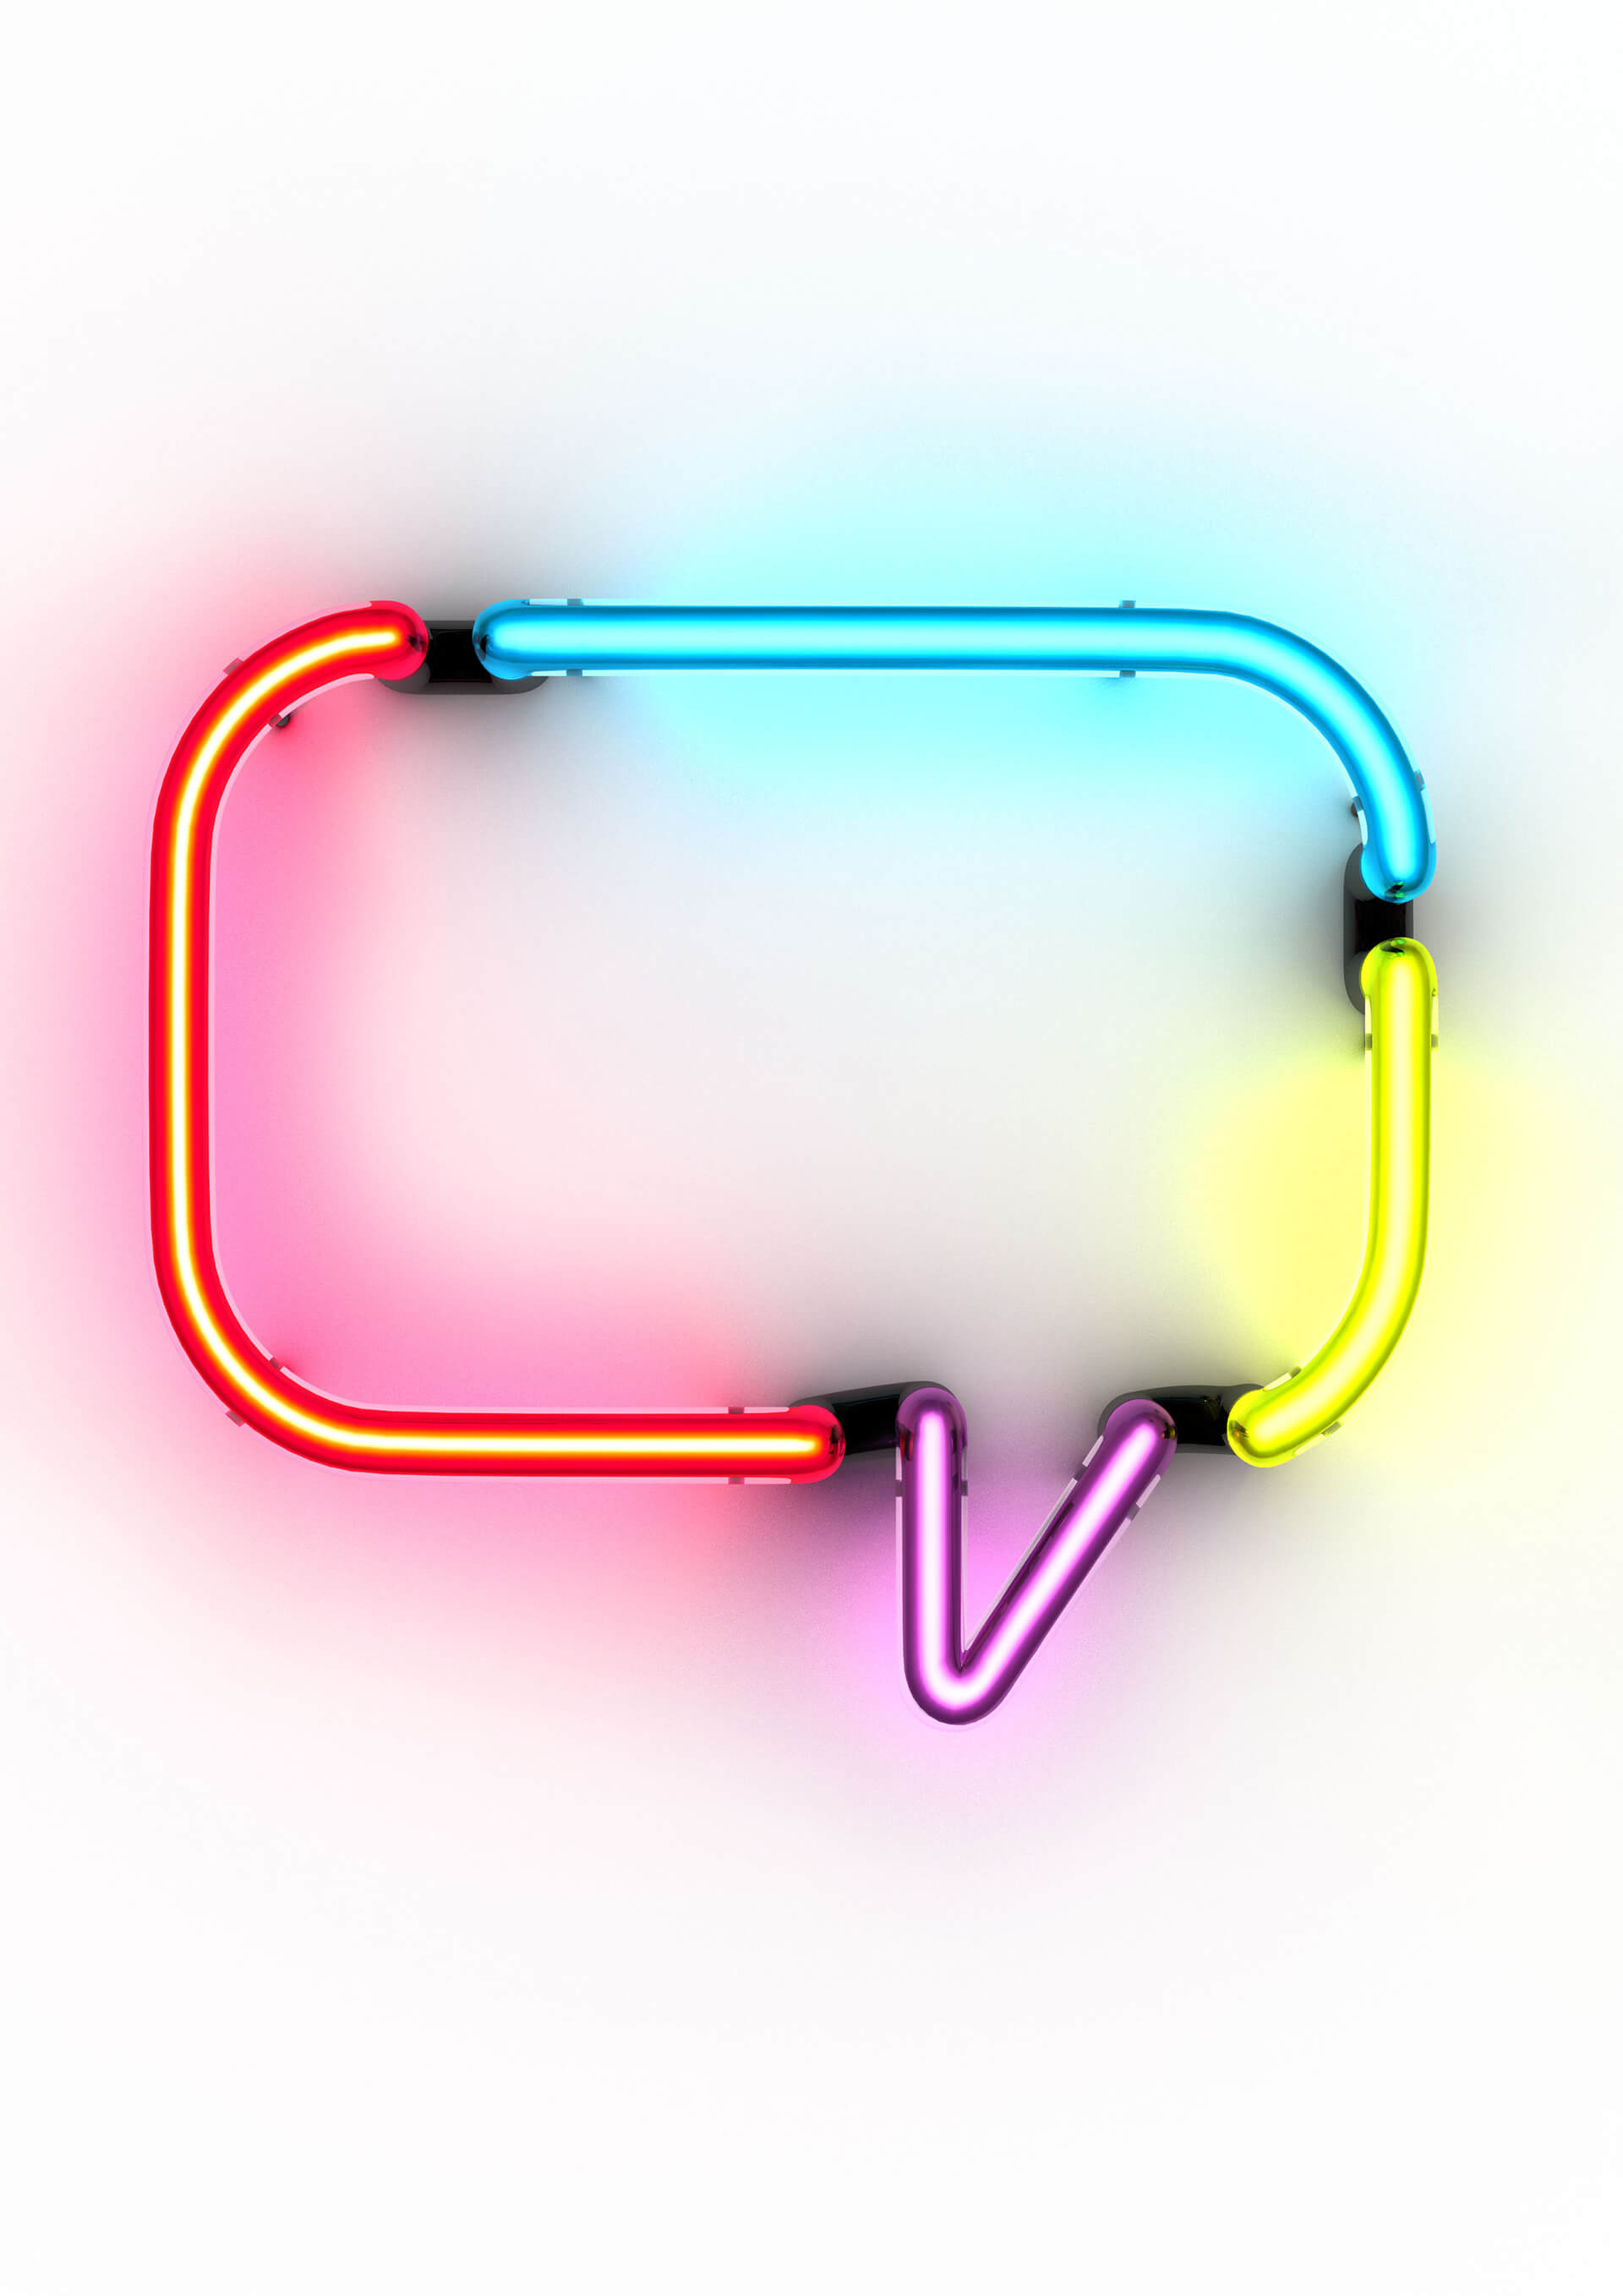 cg modelled speech bubble, created as a neon which was rendered in 3ds max and rendered using vray